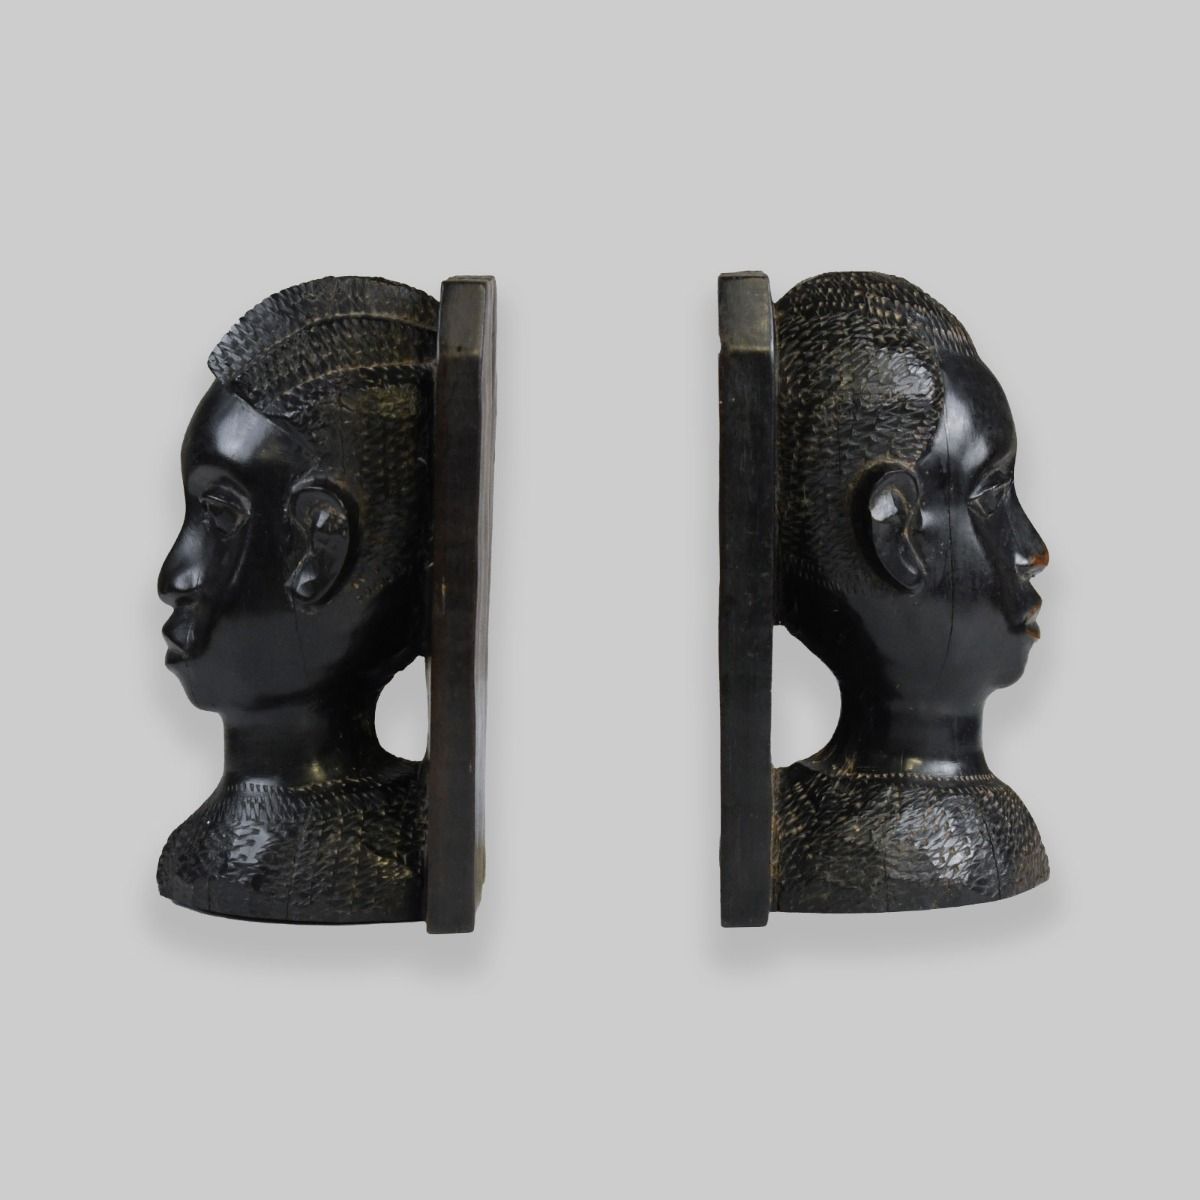 Vintage Pair of Wooden African Head Bookends